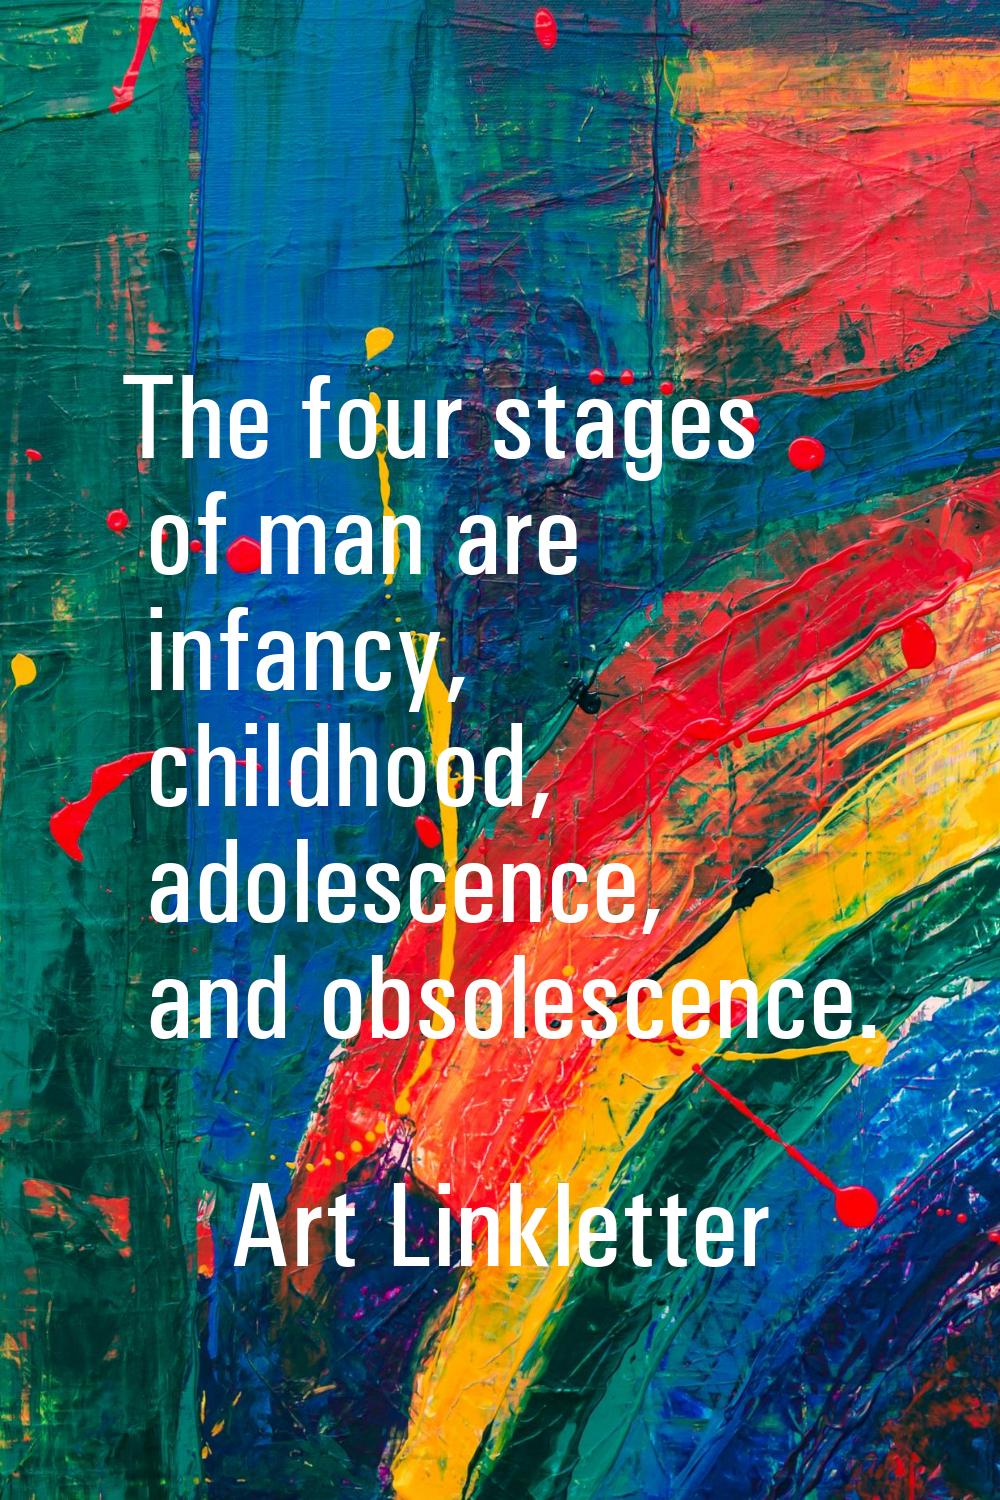 The four stages of man are infancy, childhood, adolescence, and obsolescence.